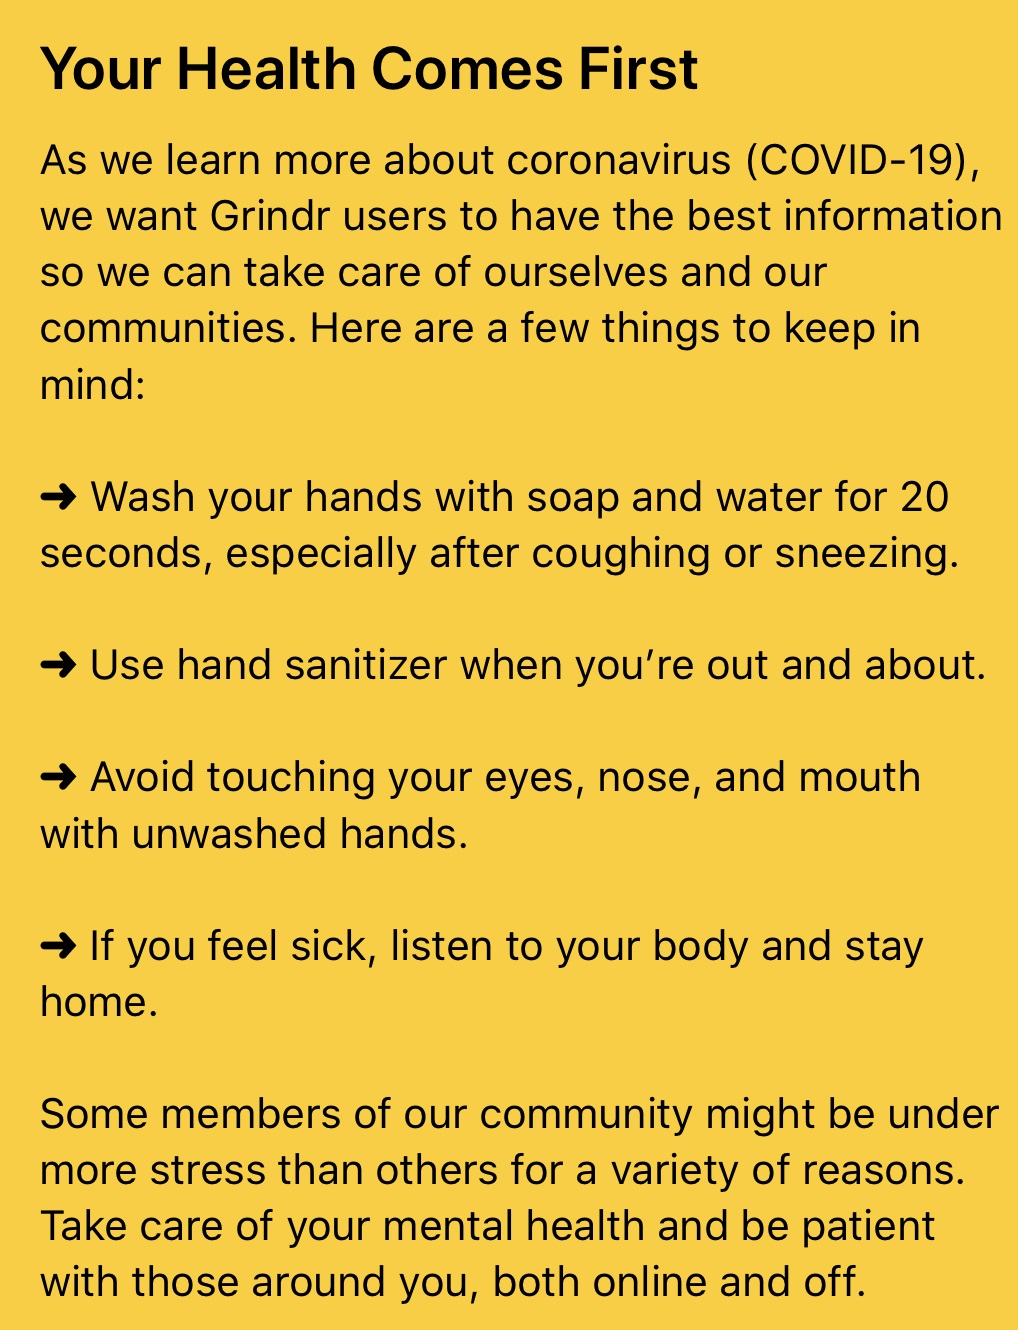 Grindr has issued a coronavirus alert to users 